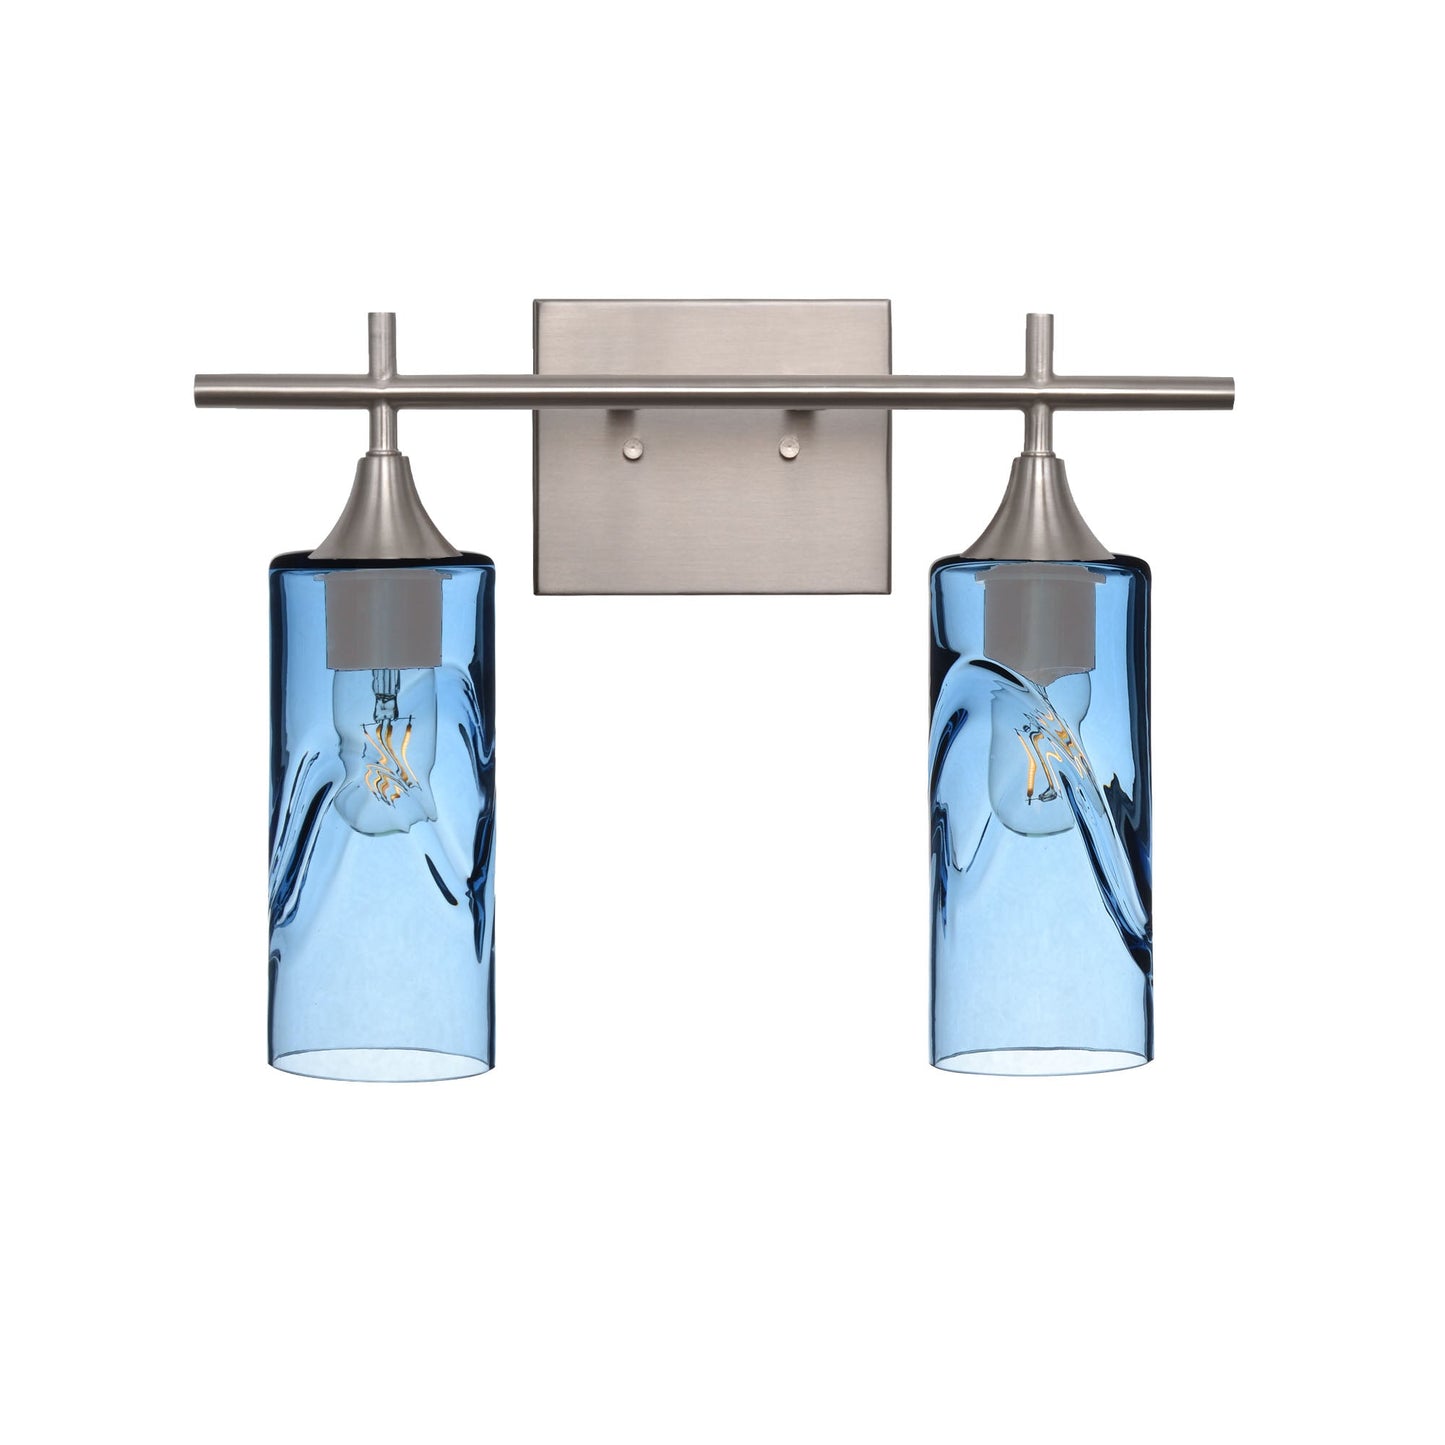 513 Swell: 2 Light Wall Vanity-Glass-Bicycle Glass Co - Hotshop-Steel Blue-Brushed Nickel-Bicycle Glass Co